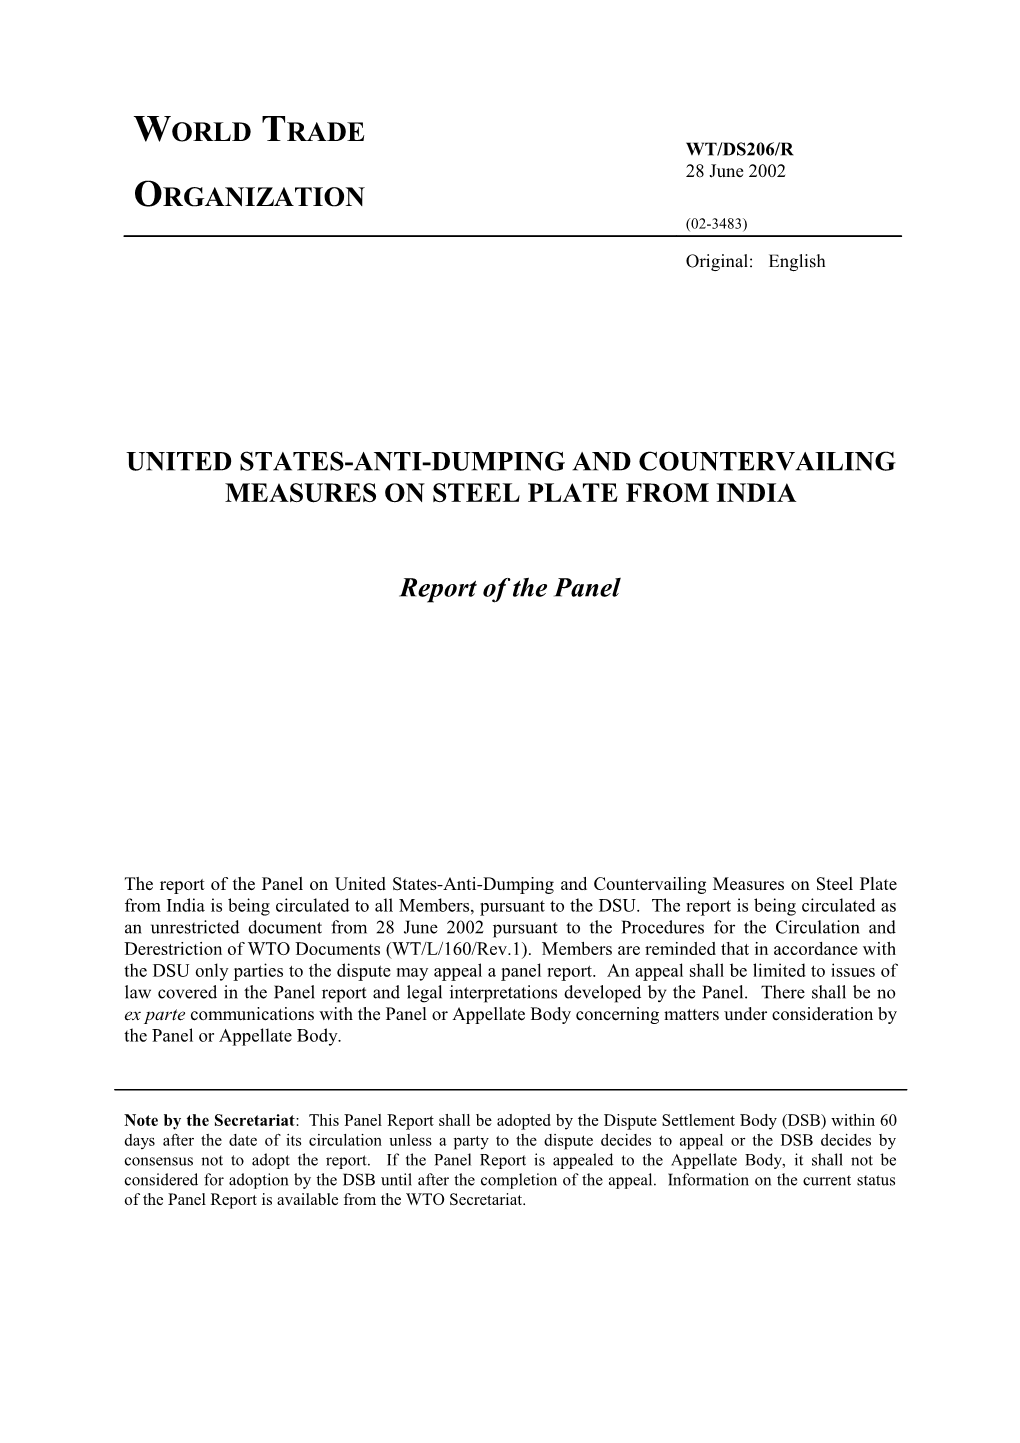 United States - Anti-Dumping and Countervailing